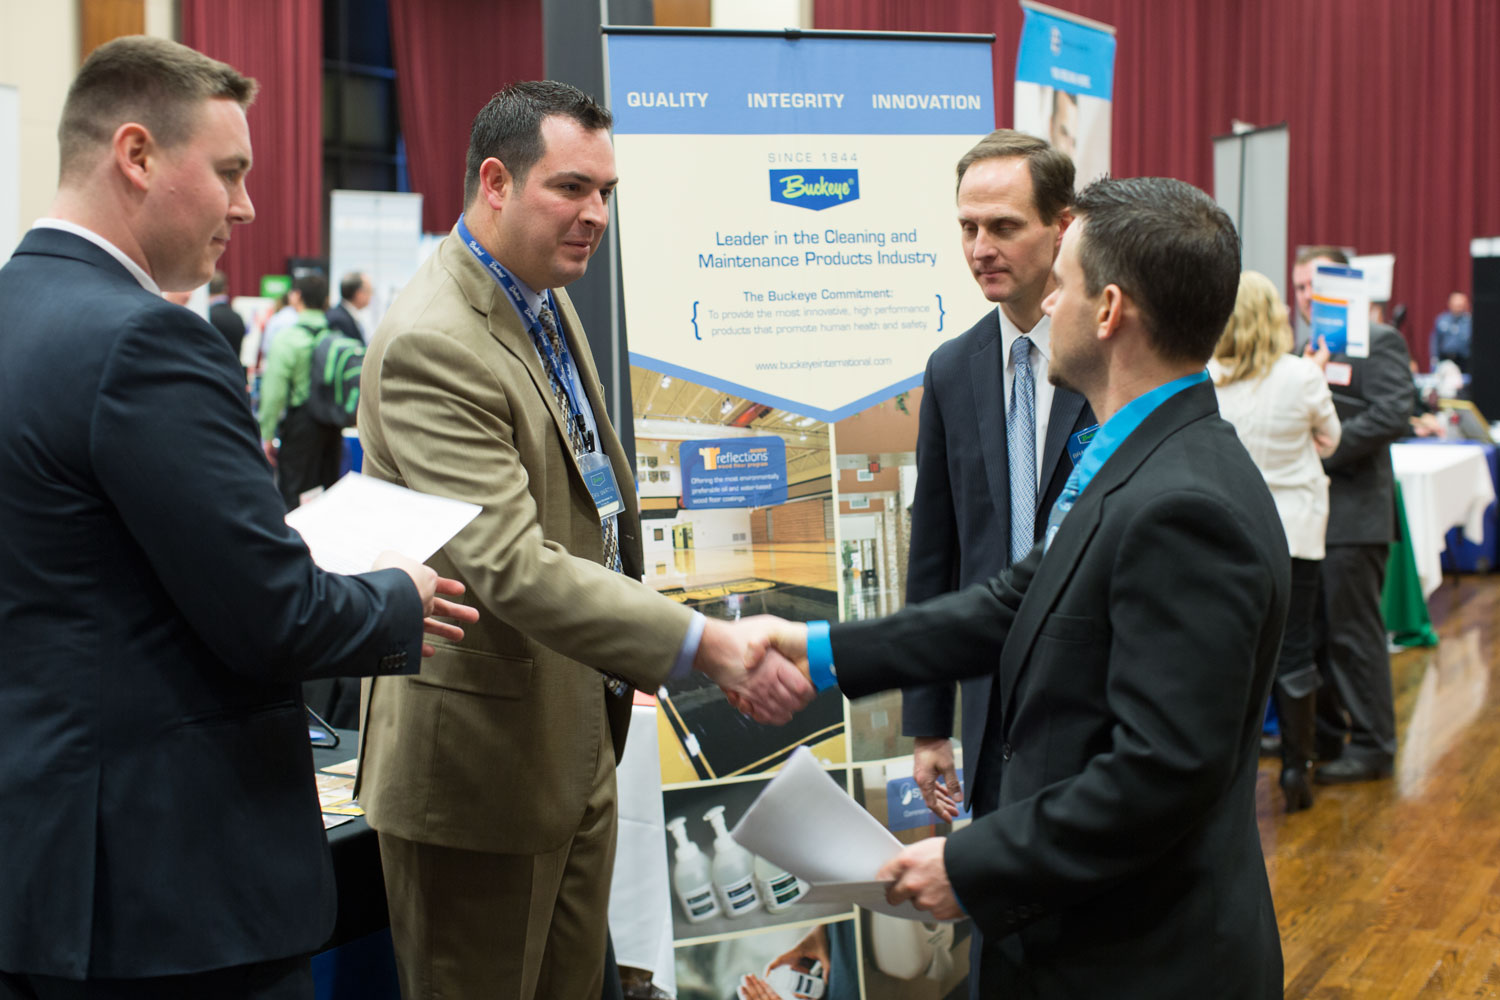 Four men talking and shaking hands at a career fair.